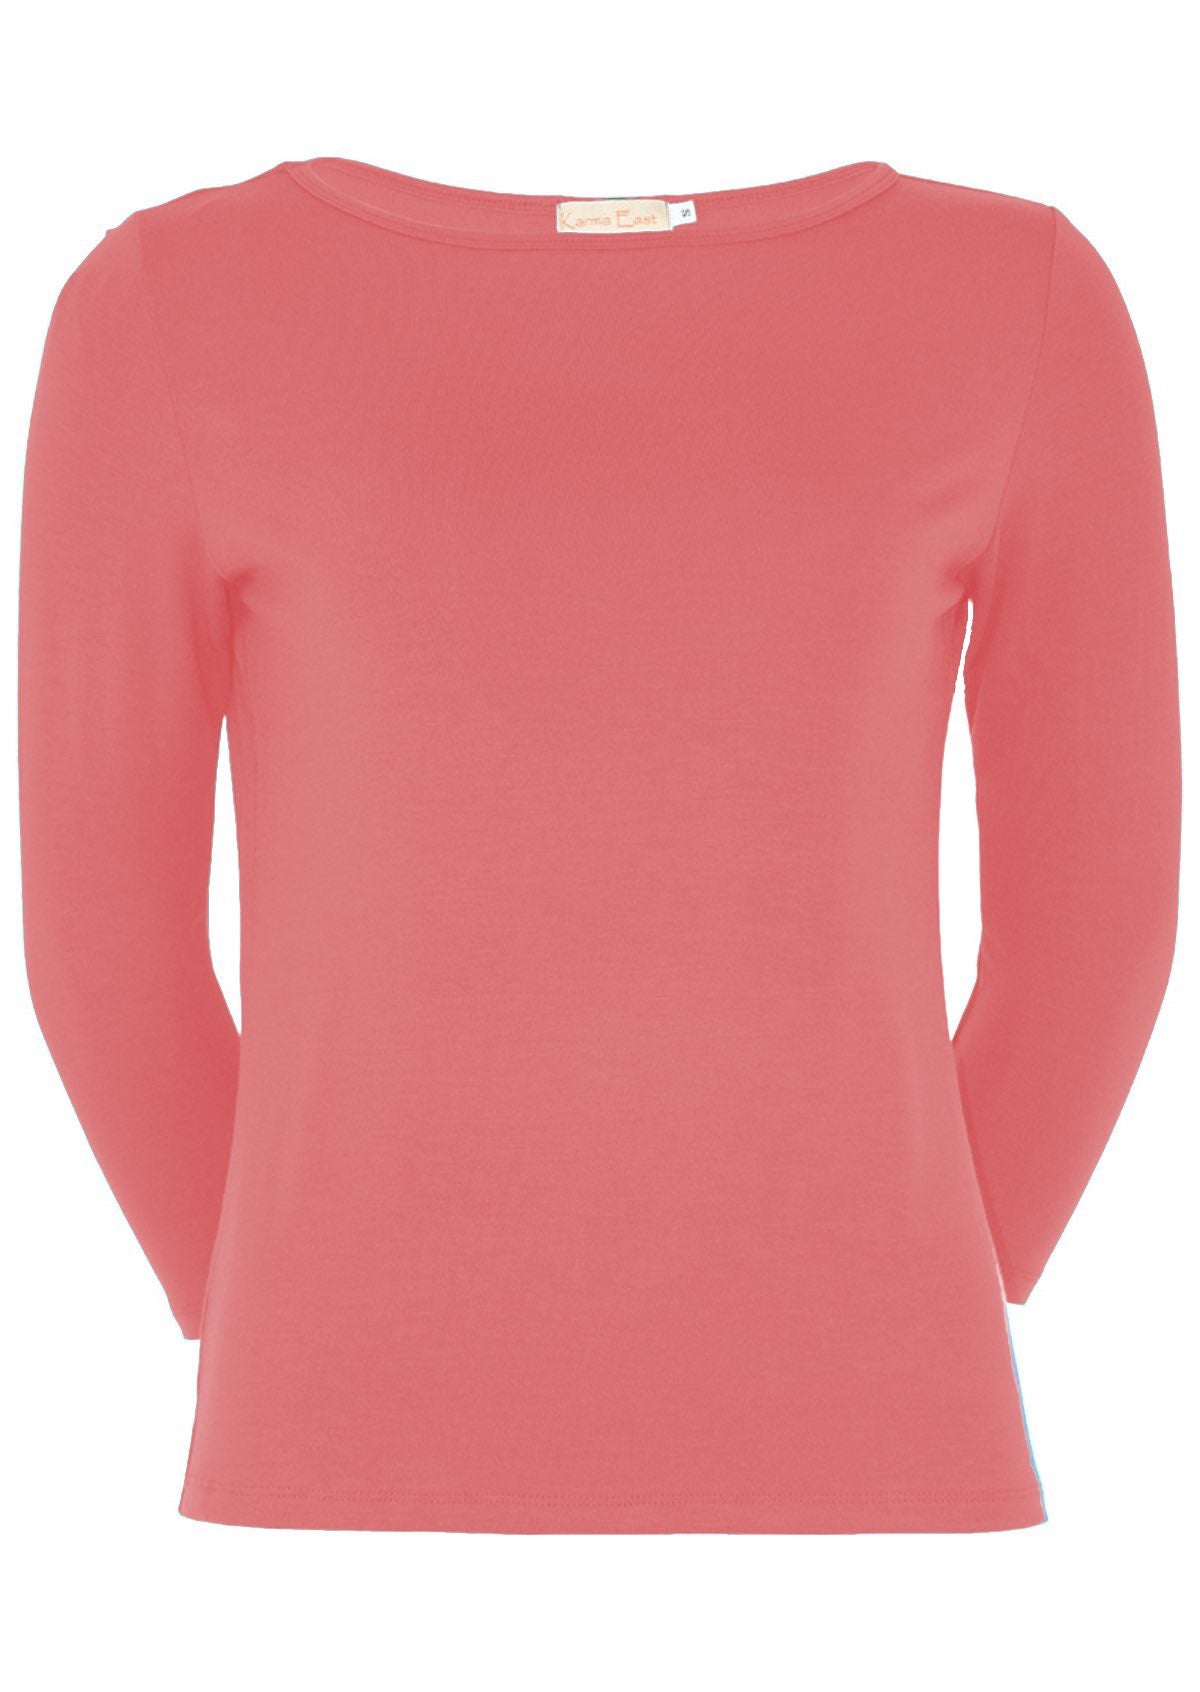 Front view of women's rayon boat neck pink 3/4 sleeve top.